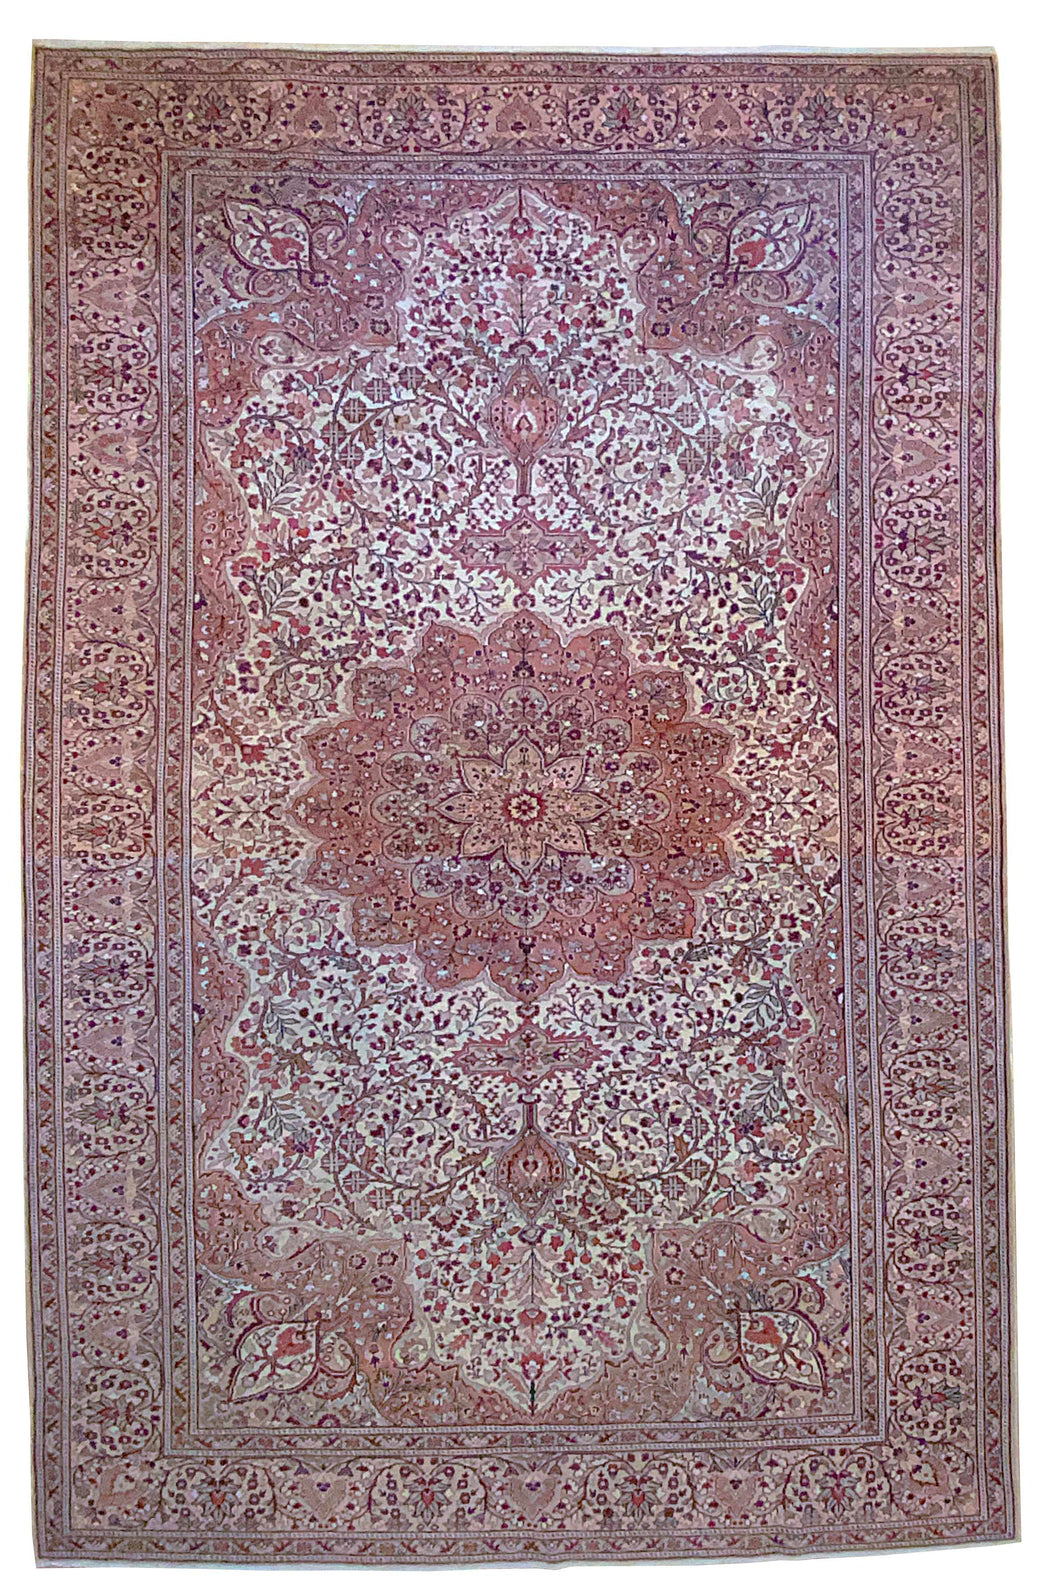 8x12 Vintage Central Anatolian 'Ladik' Turkish Area Rug | Bold Intricate Medallion Light Field Embellished with Floral Designs and Palmettes | SKU 635